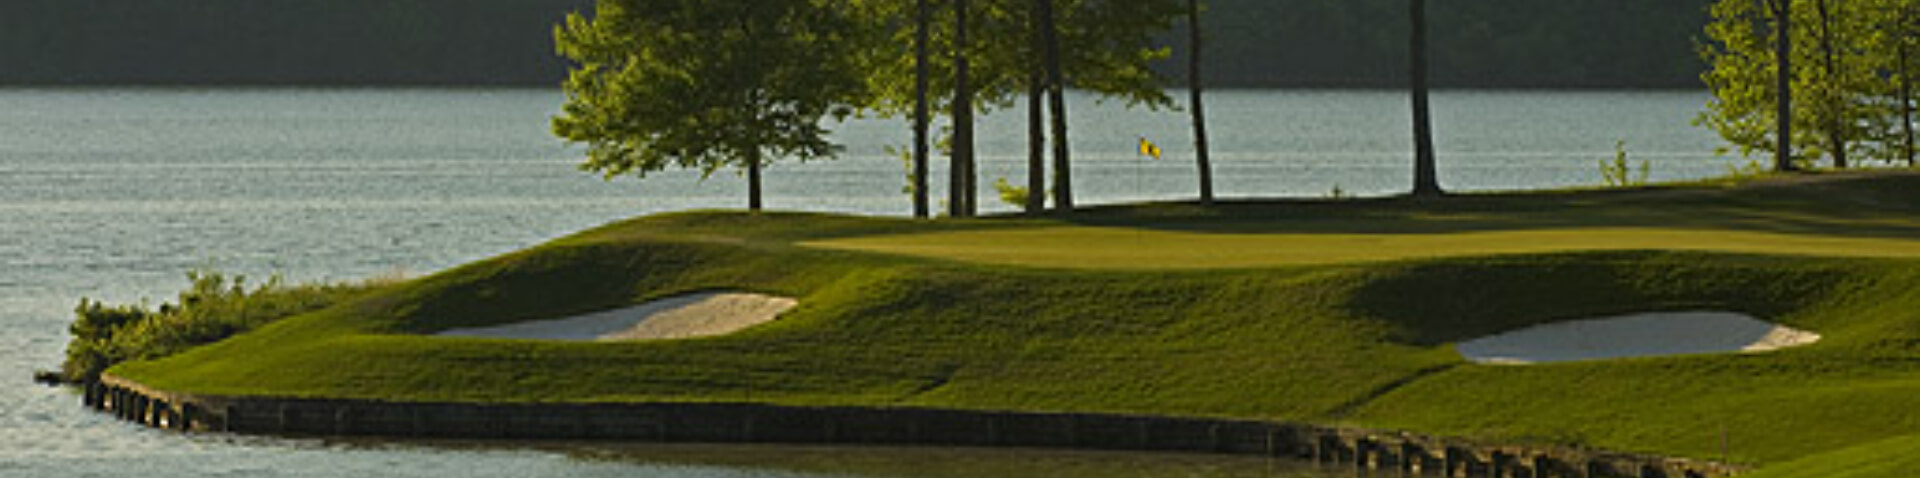 golf course by the water